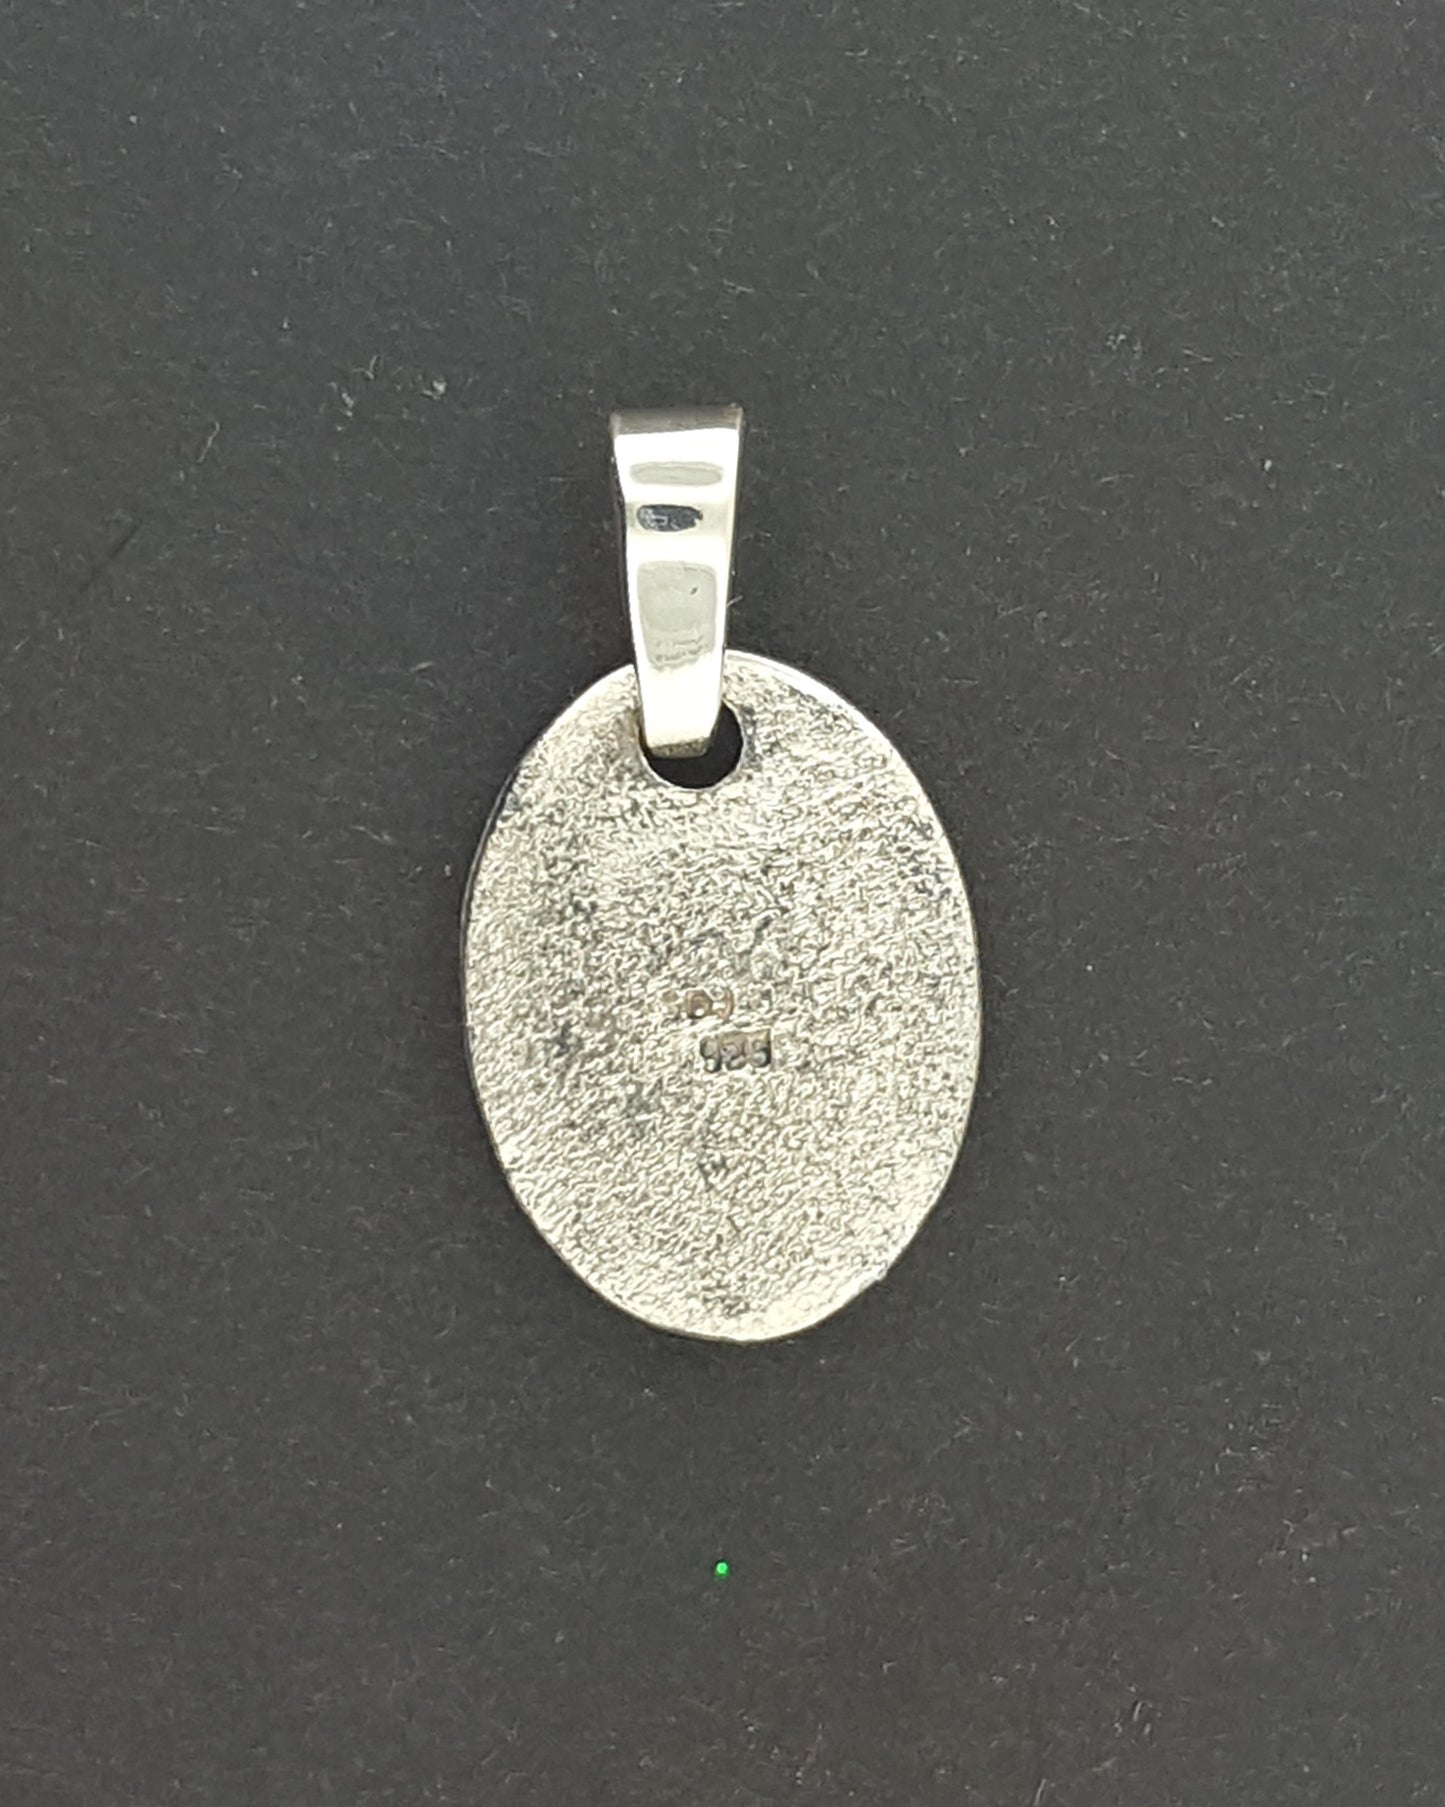 Paw Print Medallion in 925 Silver or Bronze, Dog Paw Charm Pendant, Cat Paw Charm Pendant, Paw Print Charm Necklace, Gift For Pet Owners, Silver Cat Paw Pendant, Toe Beans Pendant, Silver Pet Tag, Silver Paw Print Pendant, Silver Dog Paw Pendant